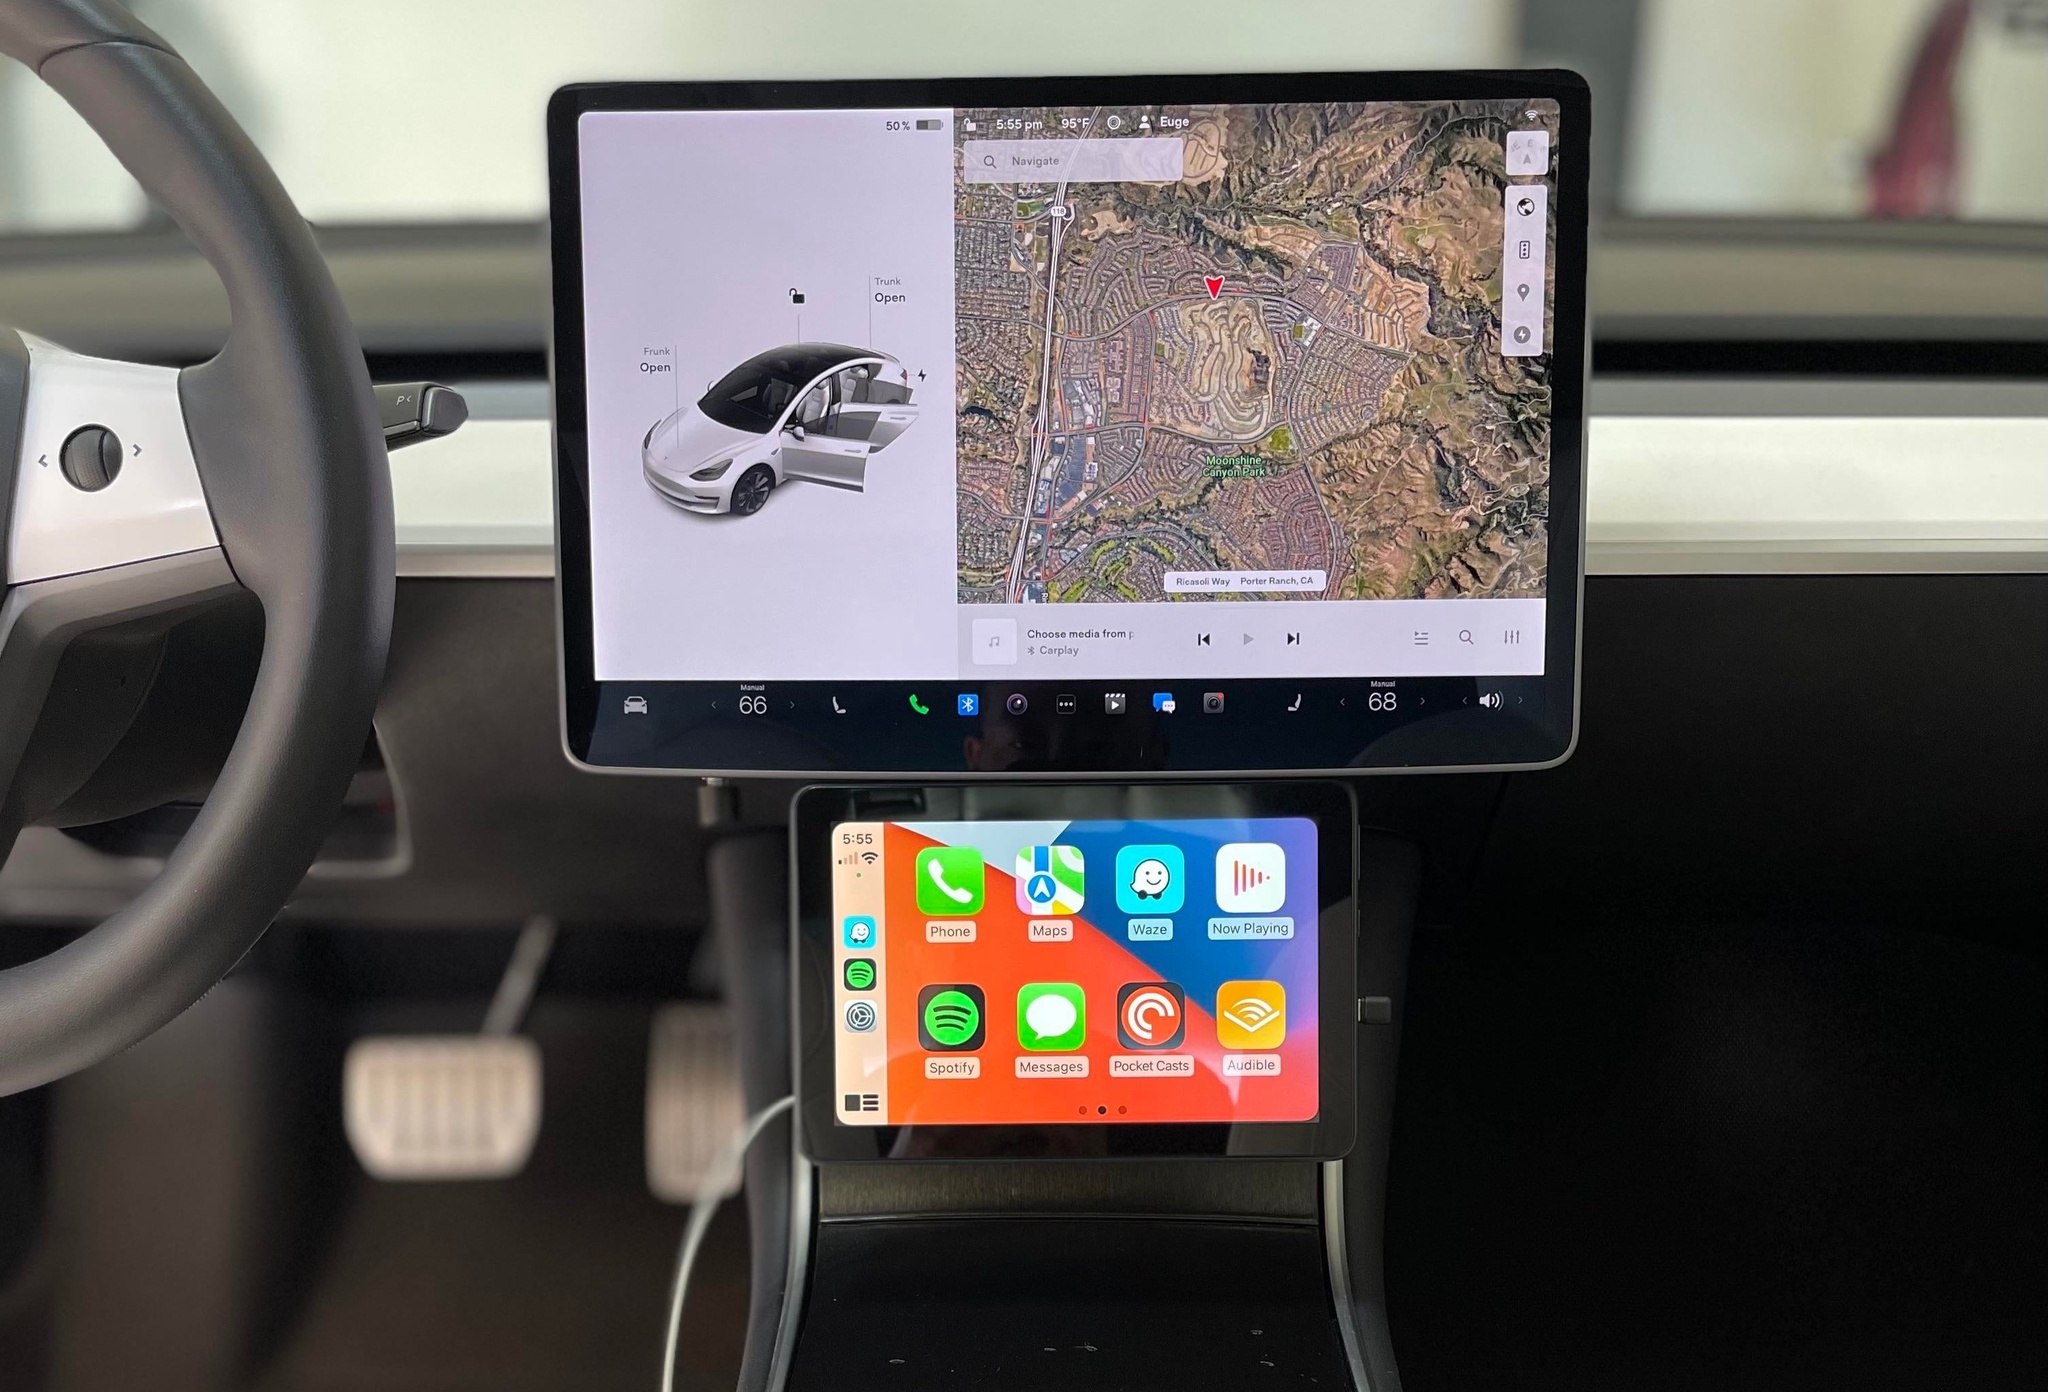 Android tablet running CarPlay in a Tesla